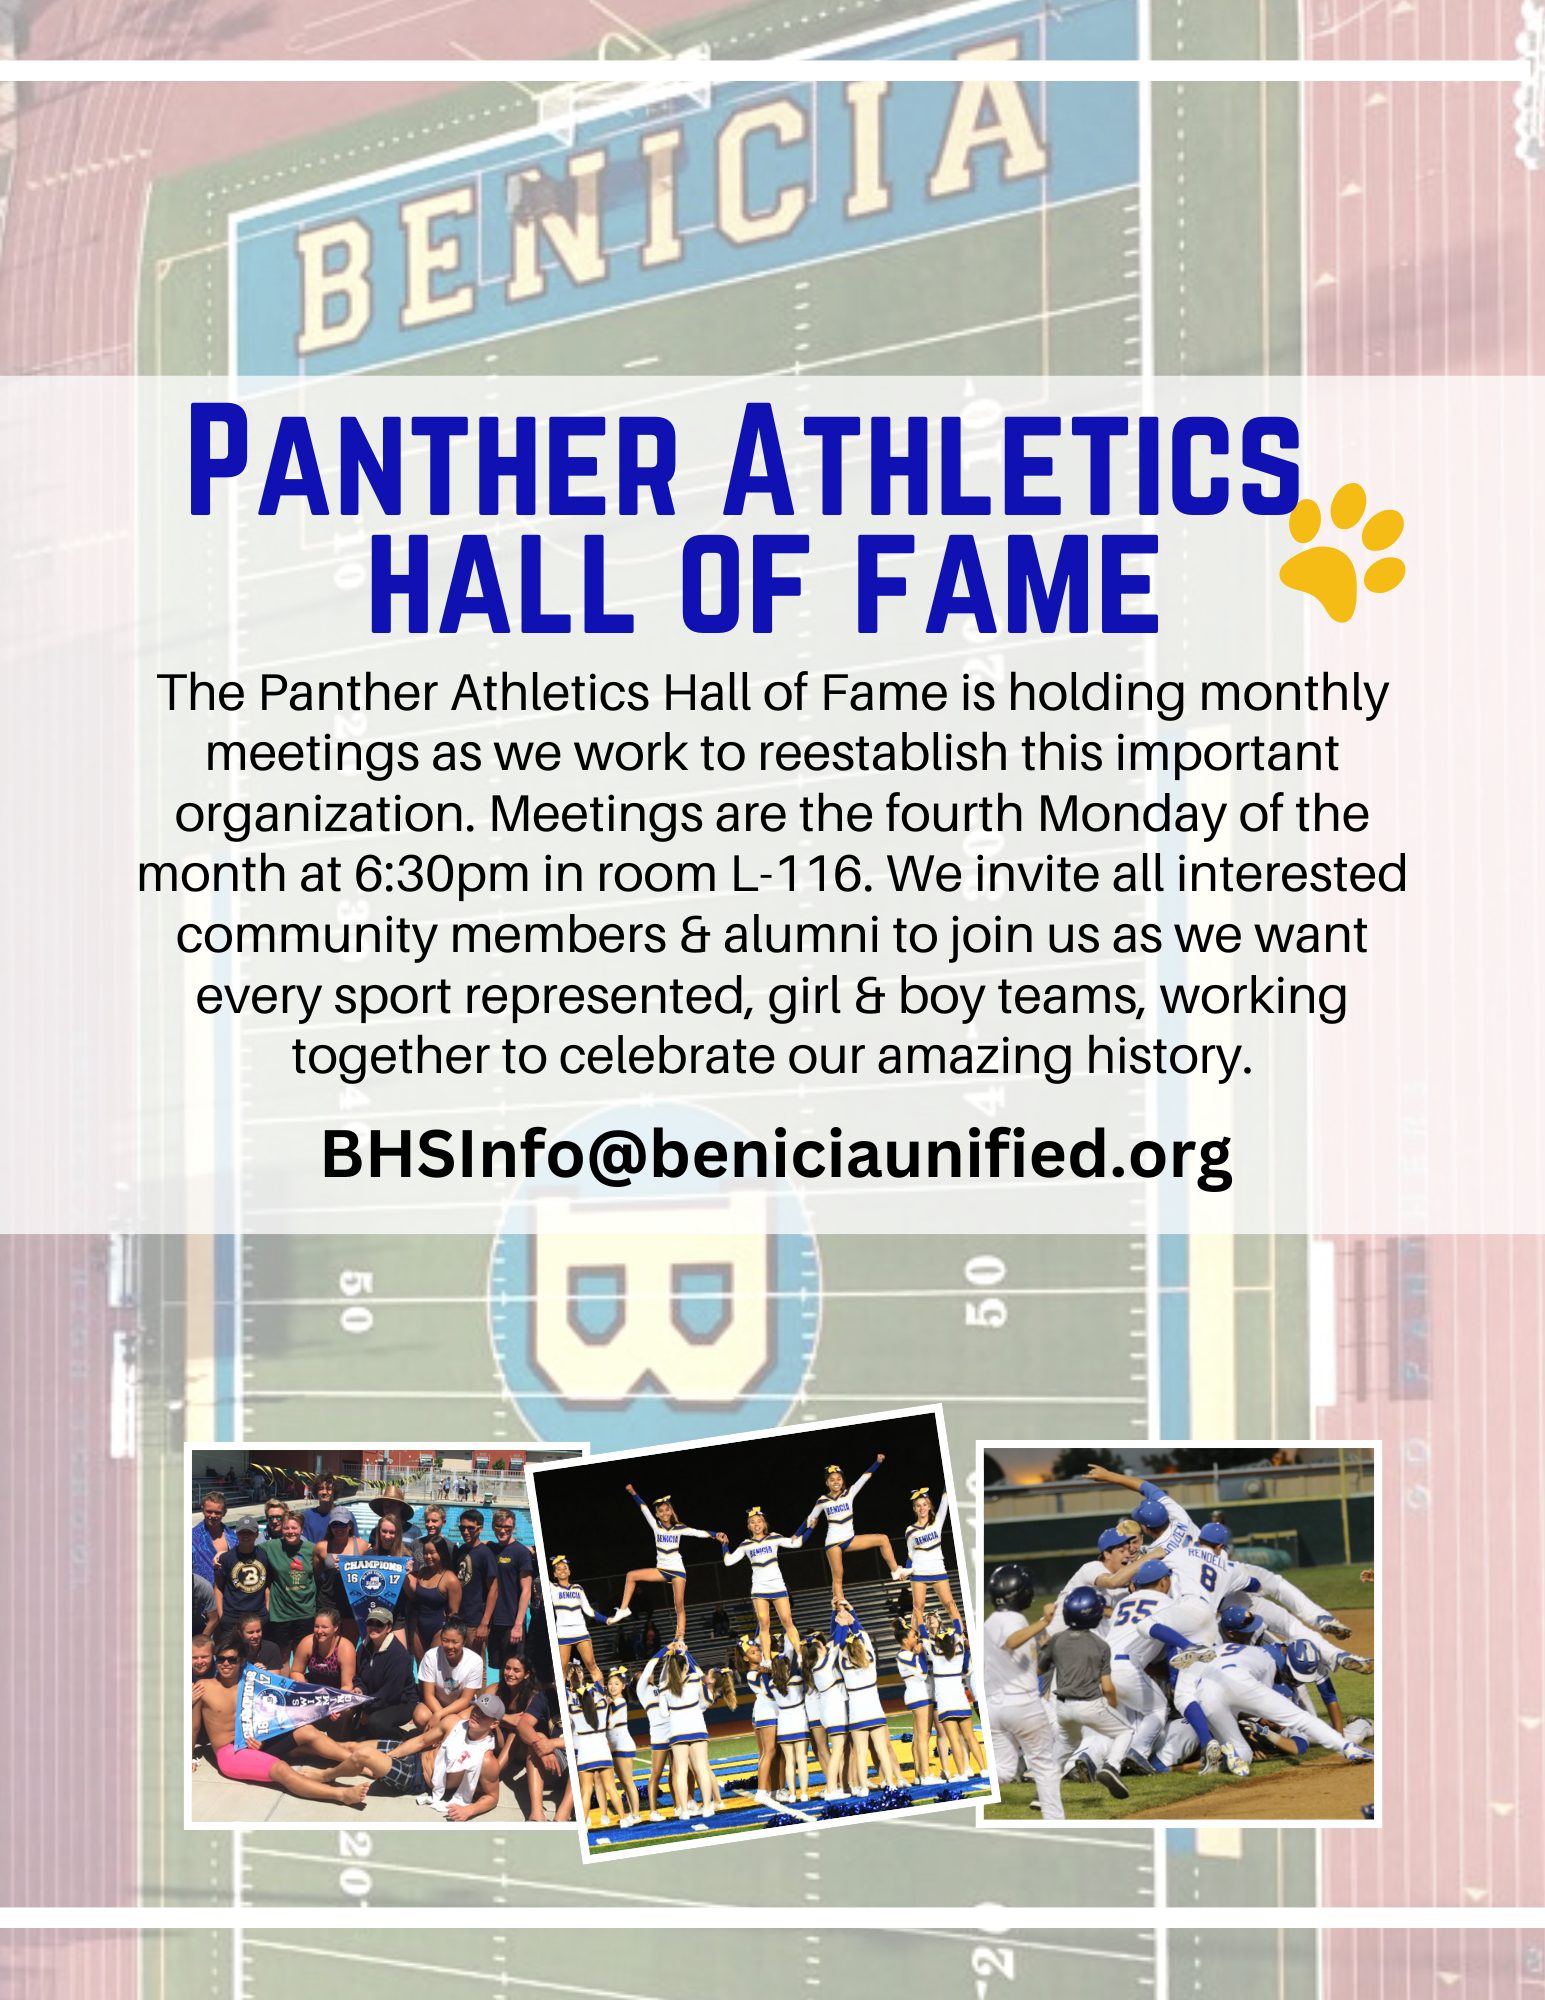 Panther Athletics Hall of Fame<br />
The panther athletica hall of fame is holding monthly meetings as we work to reestablish this important organization. Meetings are the fourth Monday of the month at 6:30pm in room L-116. We invite all interested community members & alumni to join us as we want every sport represented, girls & boys teams, working together to celebrate our amazing history. </p>
<p>bhsinfo@beniciaunified.org